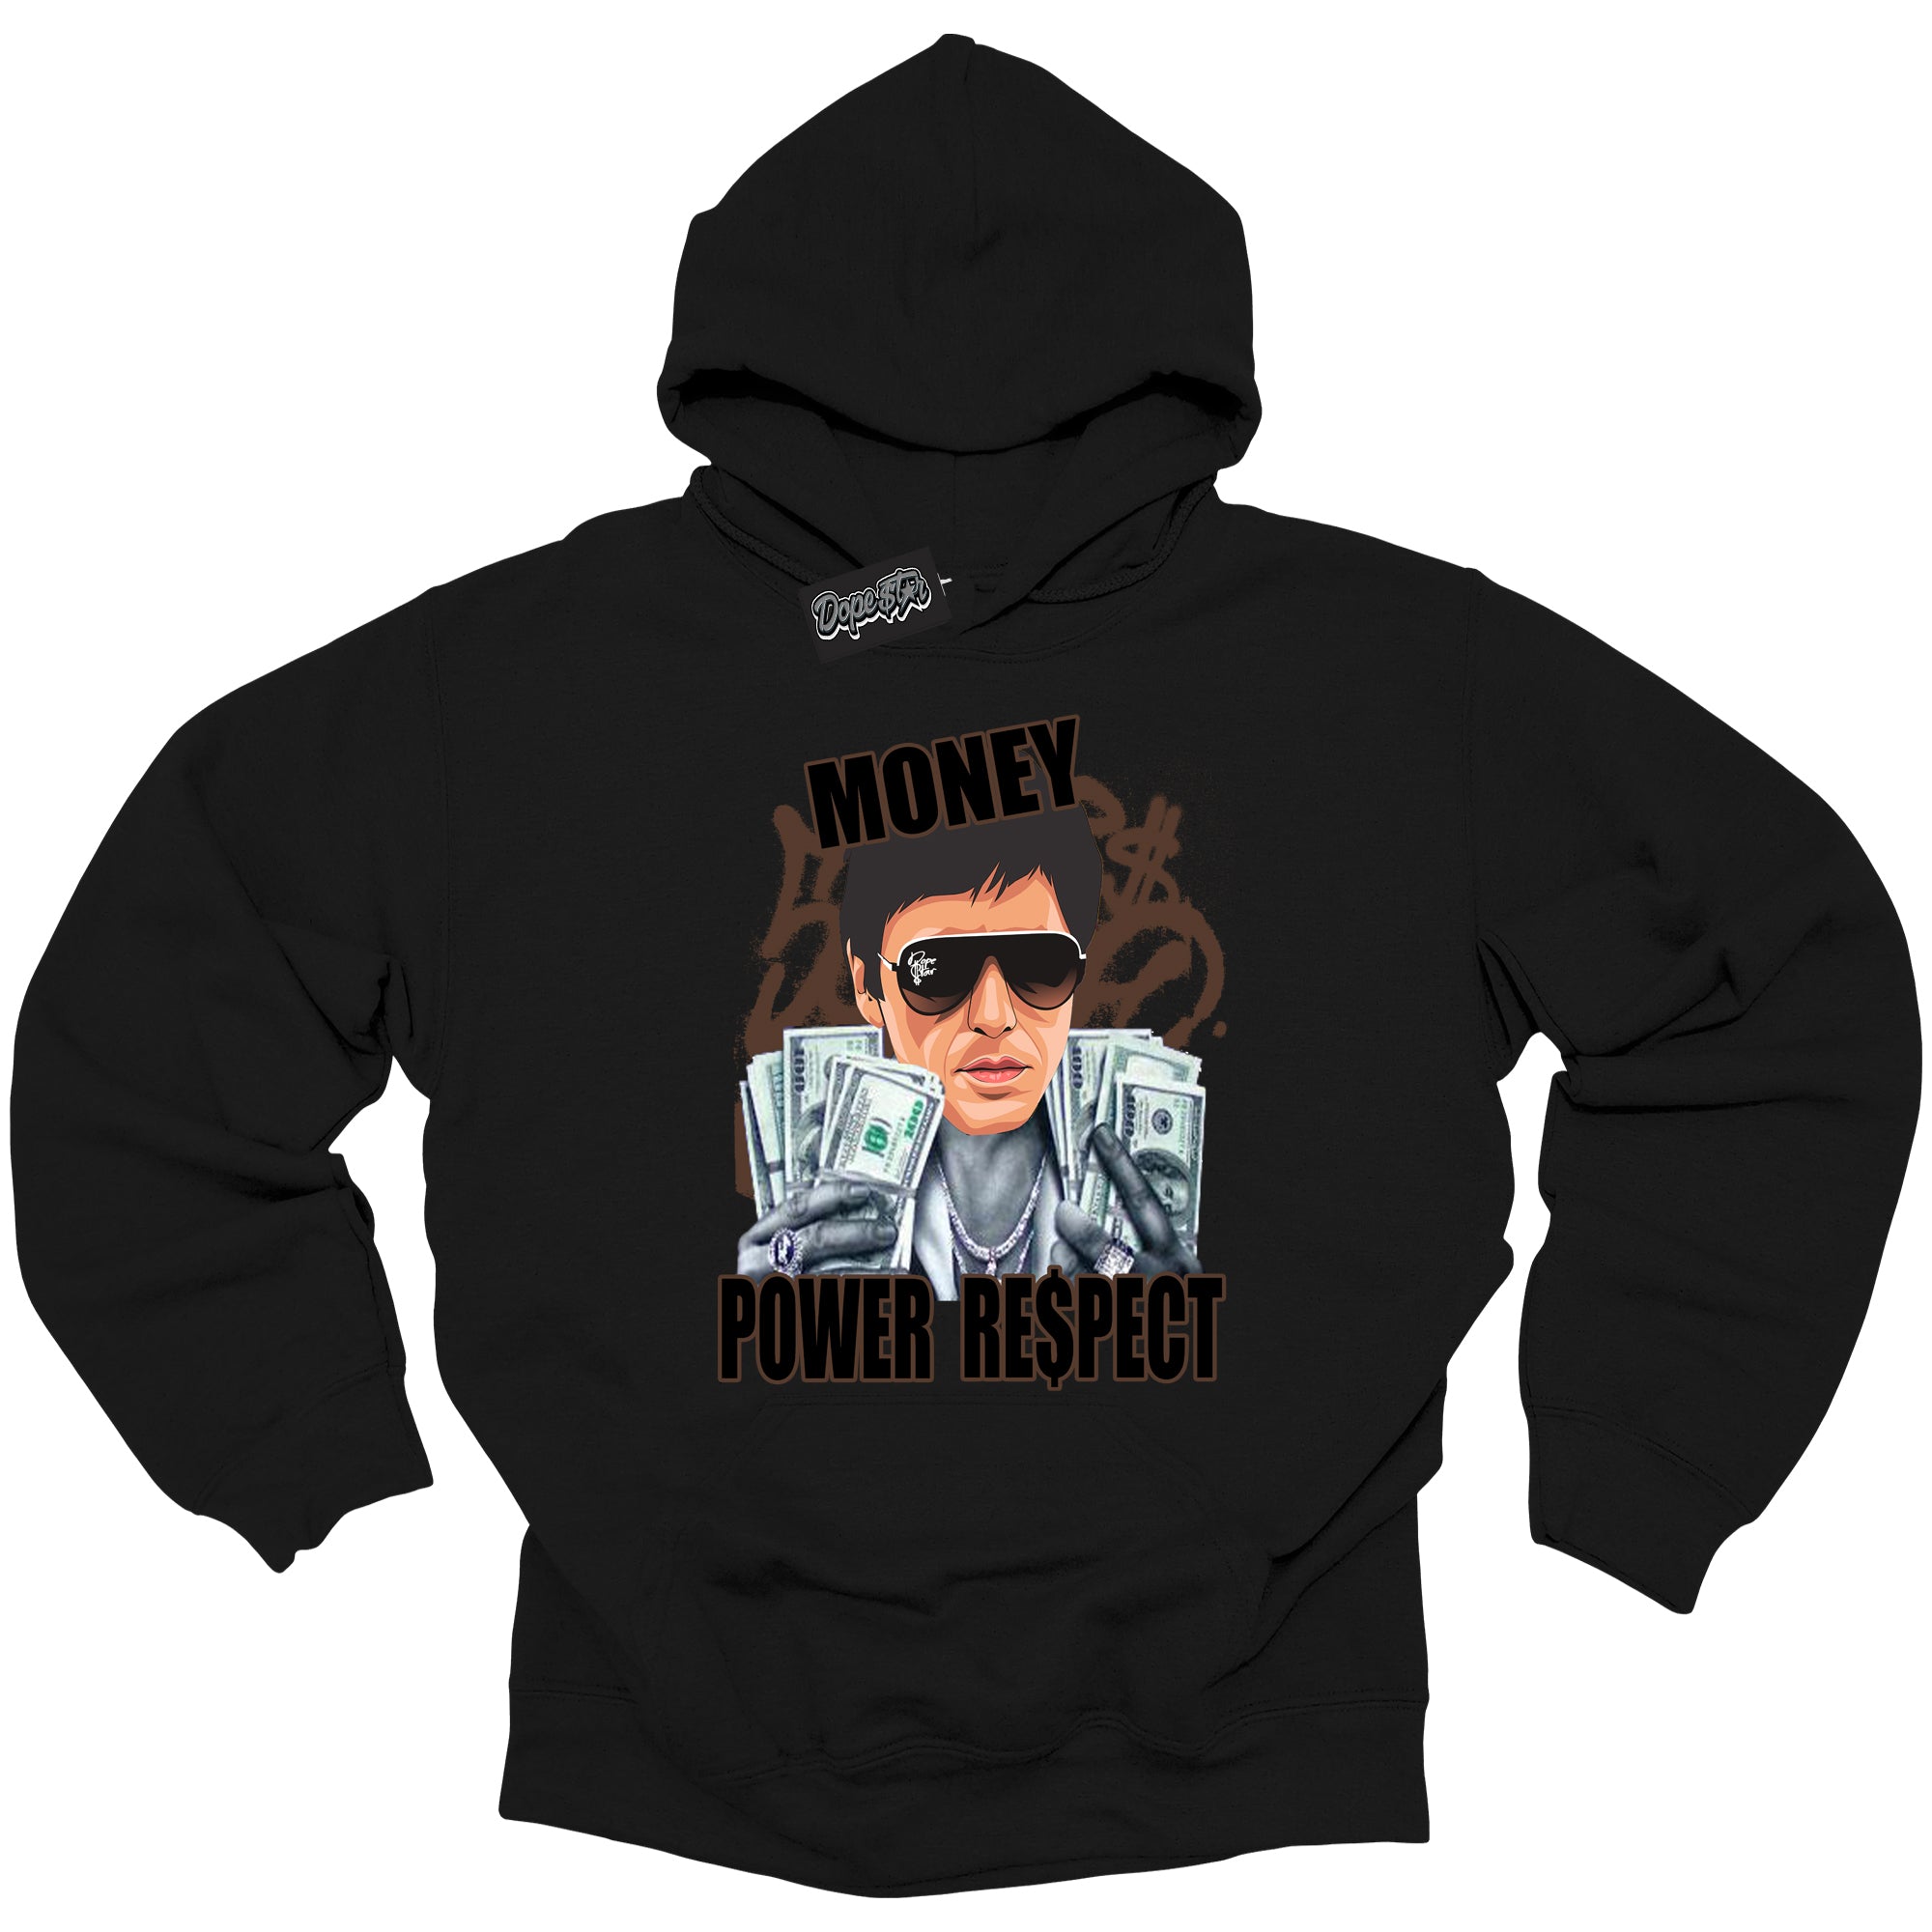 Cool Black Graphic DopeStar Hoodie with “ Tony Montana “ print, that perfectly matches Palomino 1s sneakers